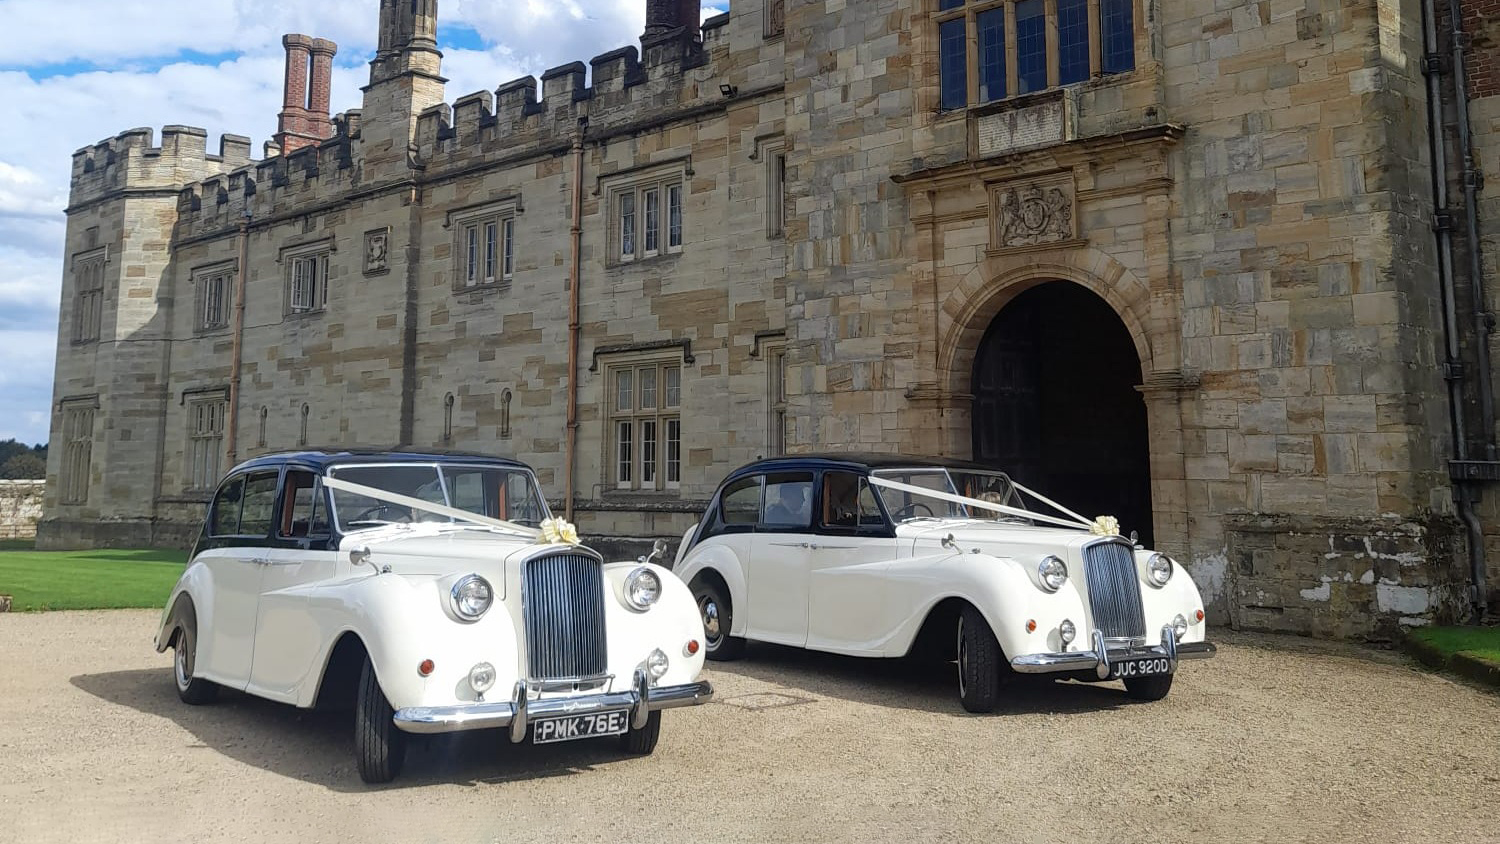 Two Classic Austin Princess Limousine decorated with Ivory Ribbons and Bows on top of the front grill. Vehicles are parked in front of a large manor house in Aylesford